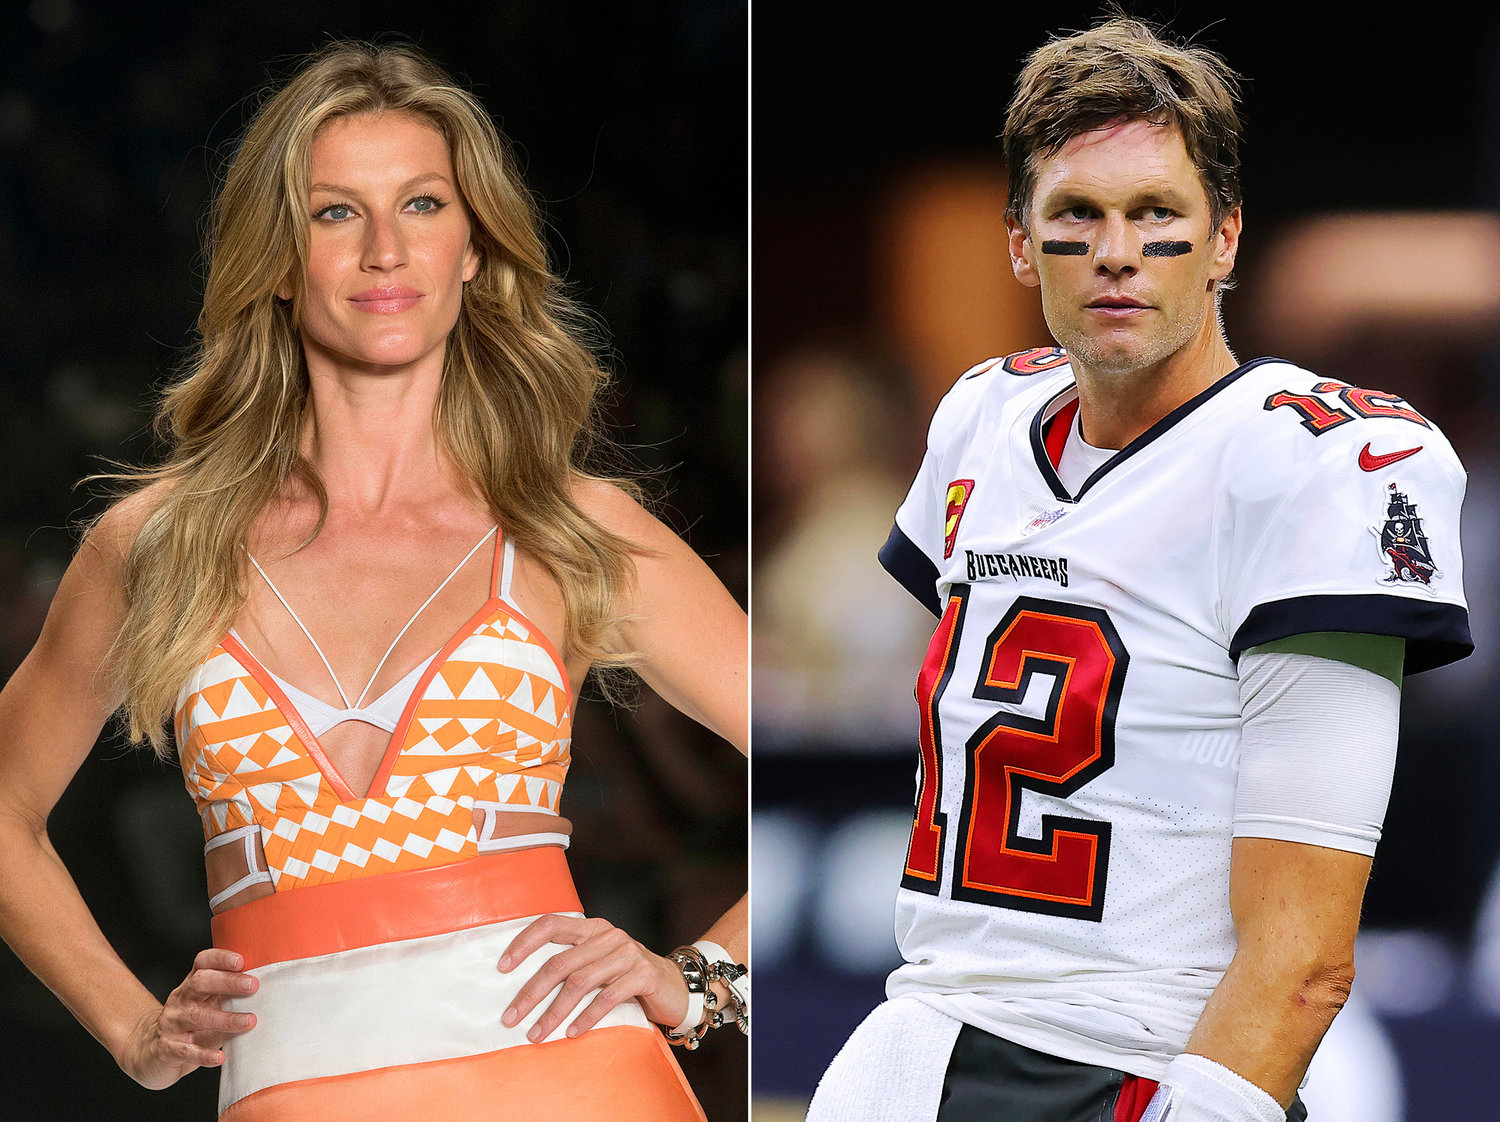 This combination of photos shows Brazilian supermodel Gisele Bundchen modeling the Colcci Summer collection at Sao Paulo Fashion Week in Sao Paulo, Brazil, on April 15, 2015, left, and Tampa Bay Buccaneers quarterback Tom Brady before an NFL football game against the New Orleans Saints, on Sept. 18, 2021, in New Orleans. The couple announced their divorce, ending their 13-year marriage. (AP Photo/Andre Penner, left, and Jonathan Bachman)